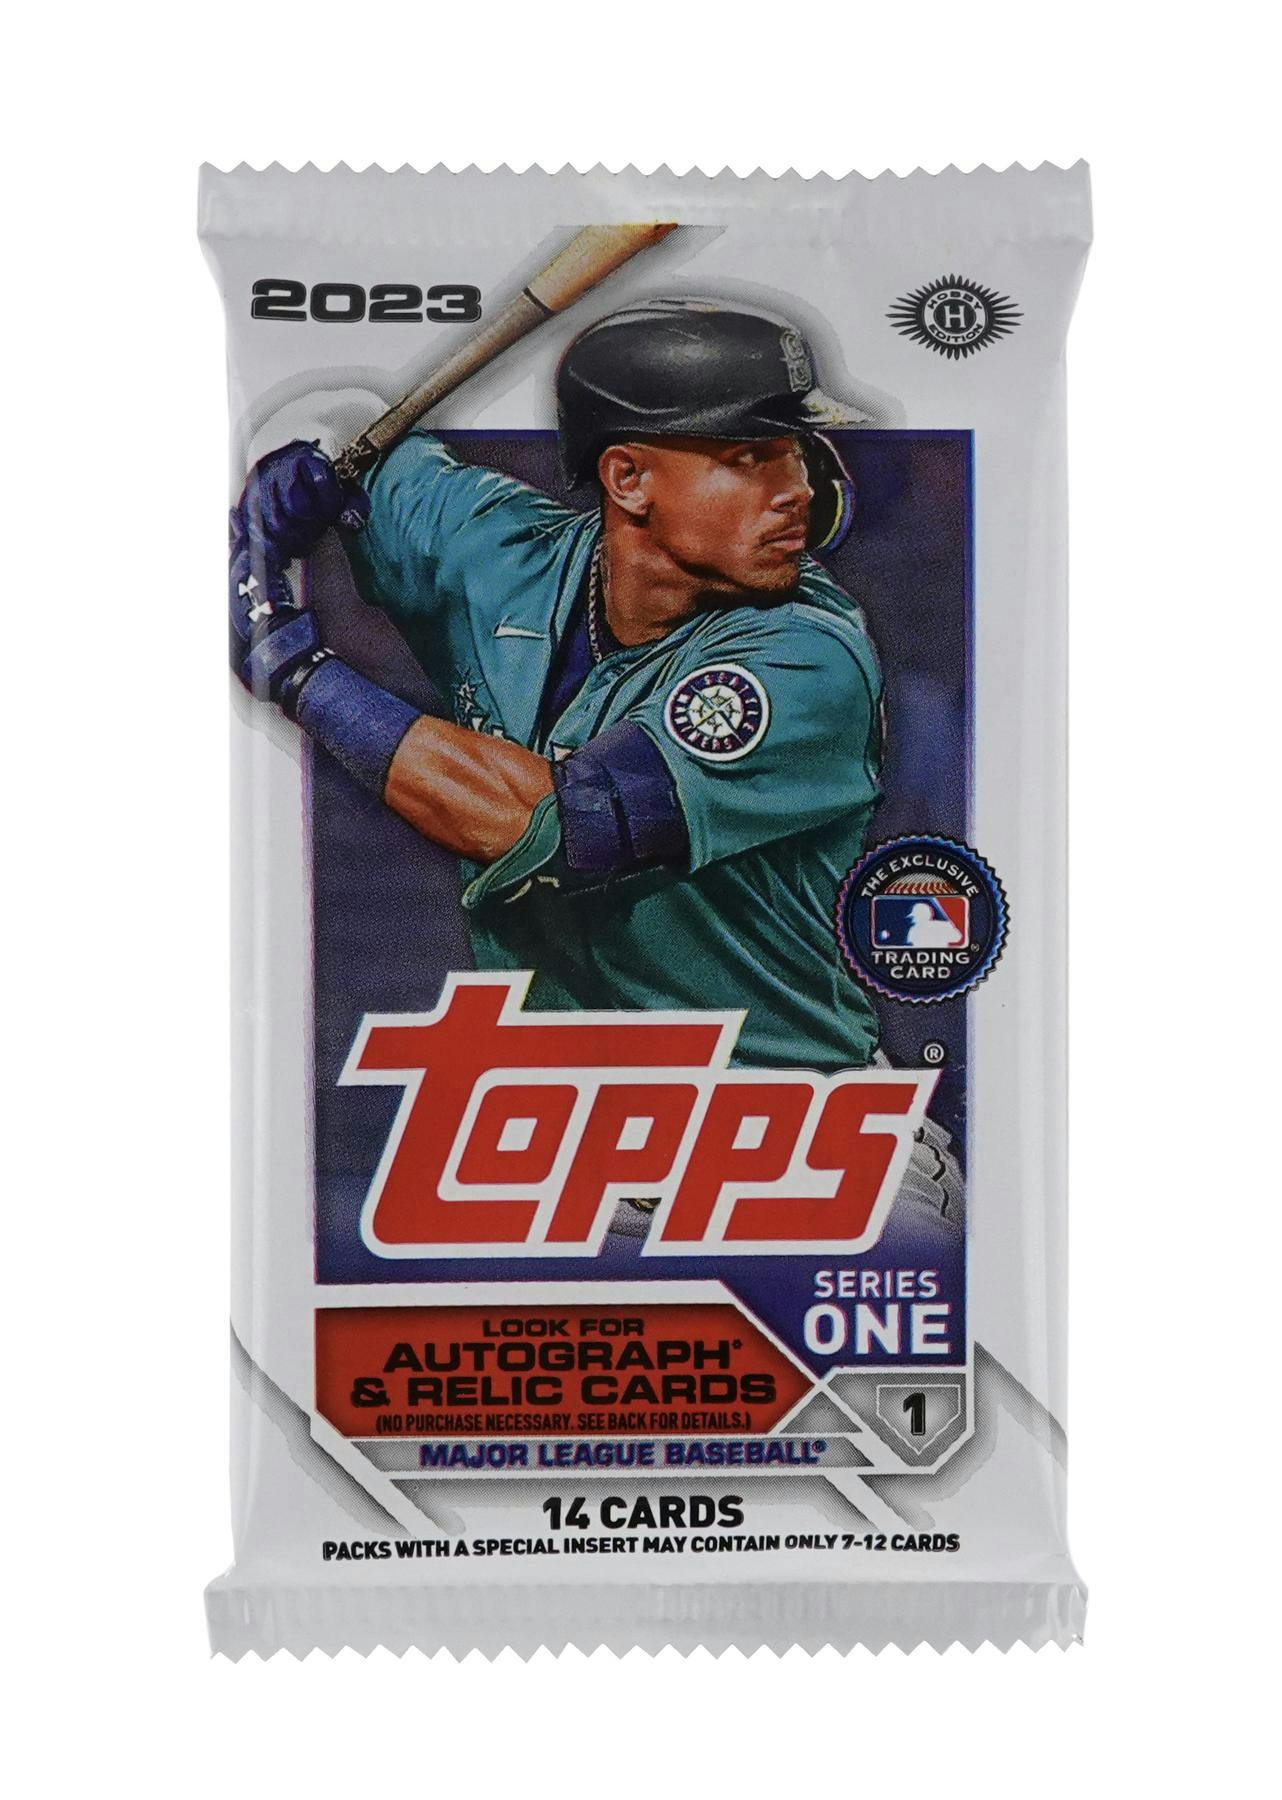 2023 Topps Series 1 Baseball Stars Base Autograph ~ Pick your Card